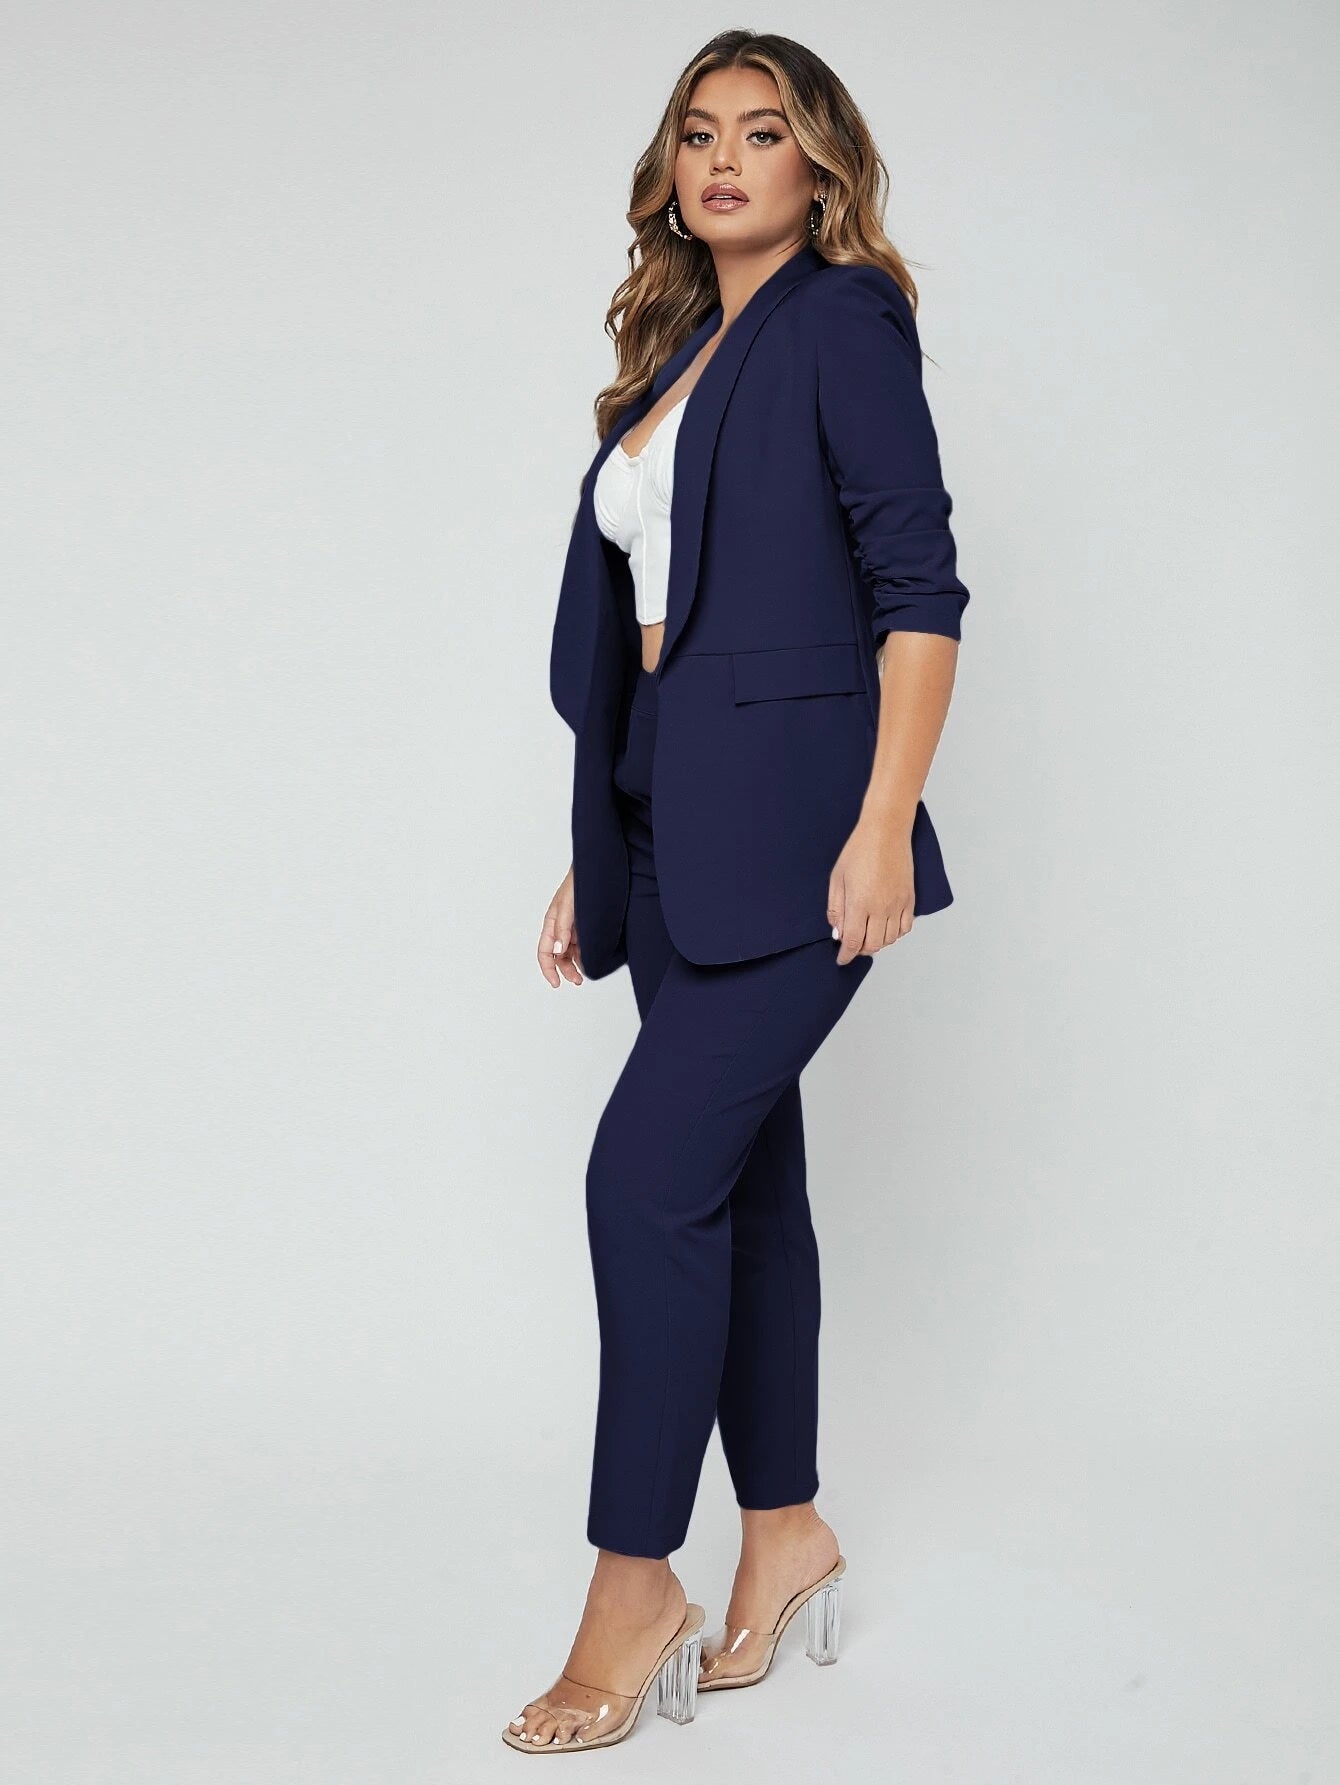 Babe Boss Suit - Navy Blue